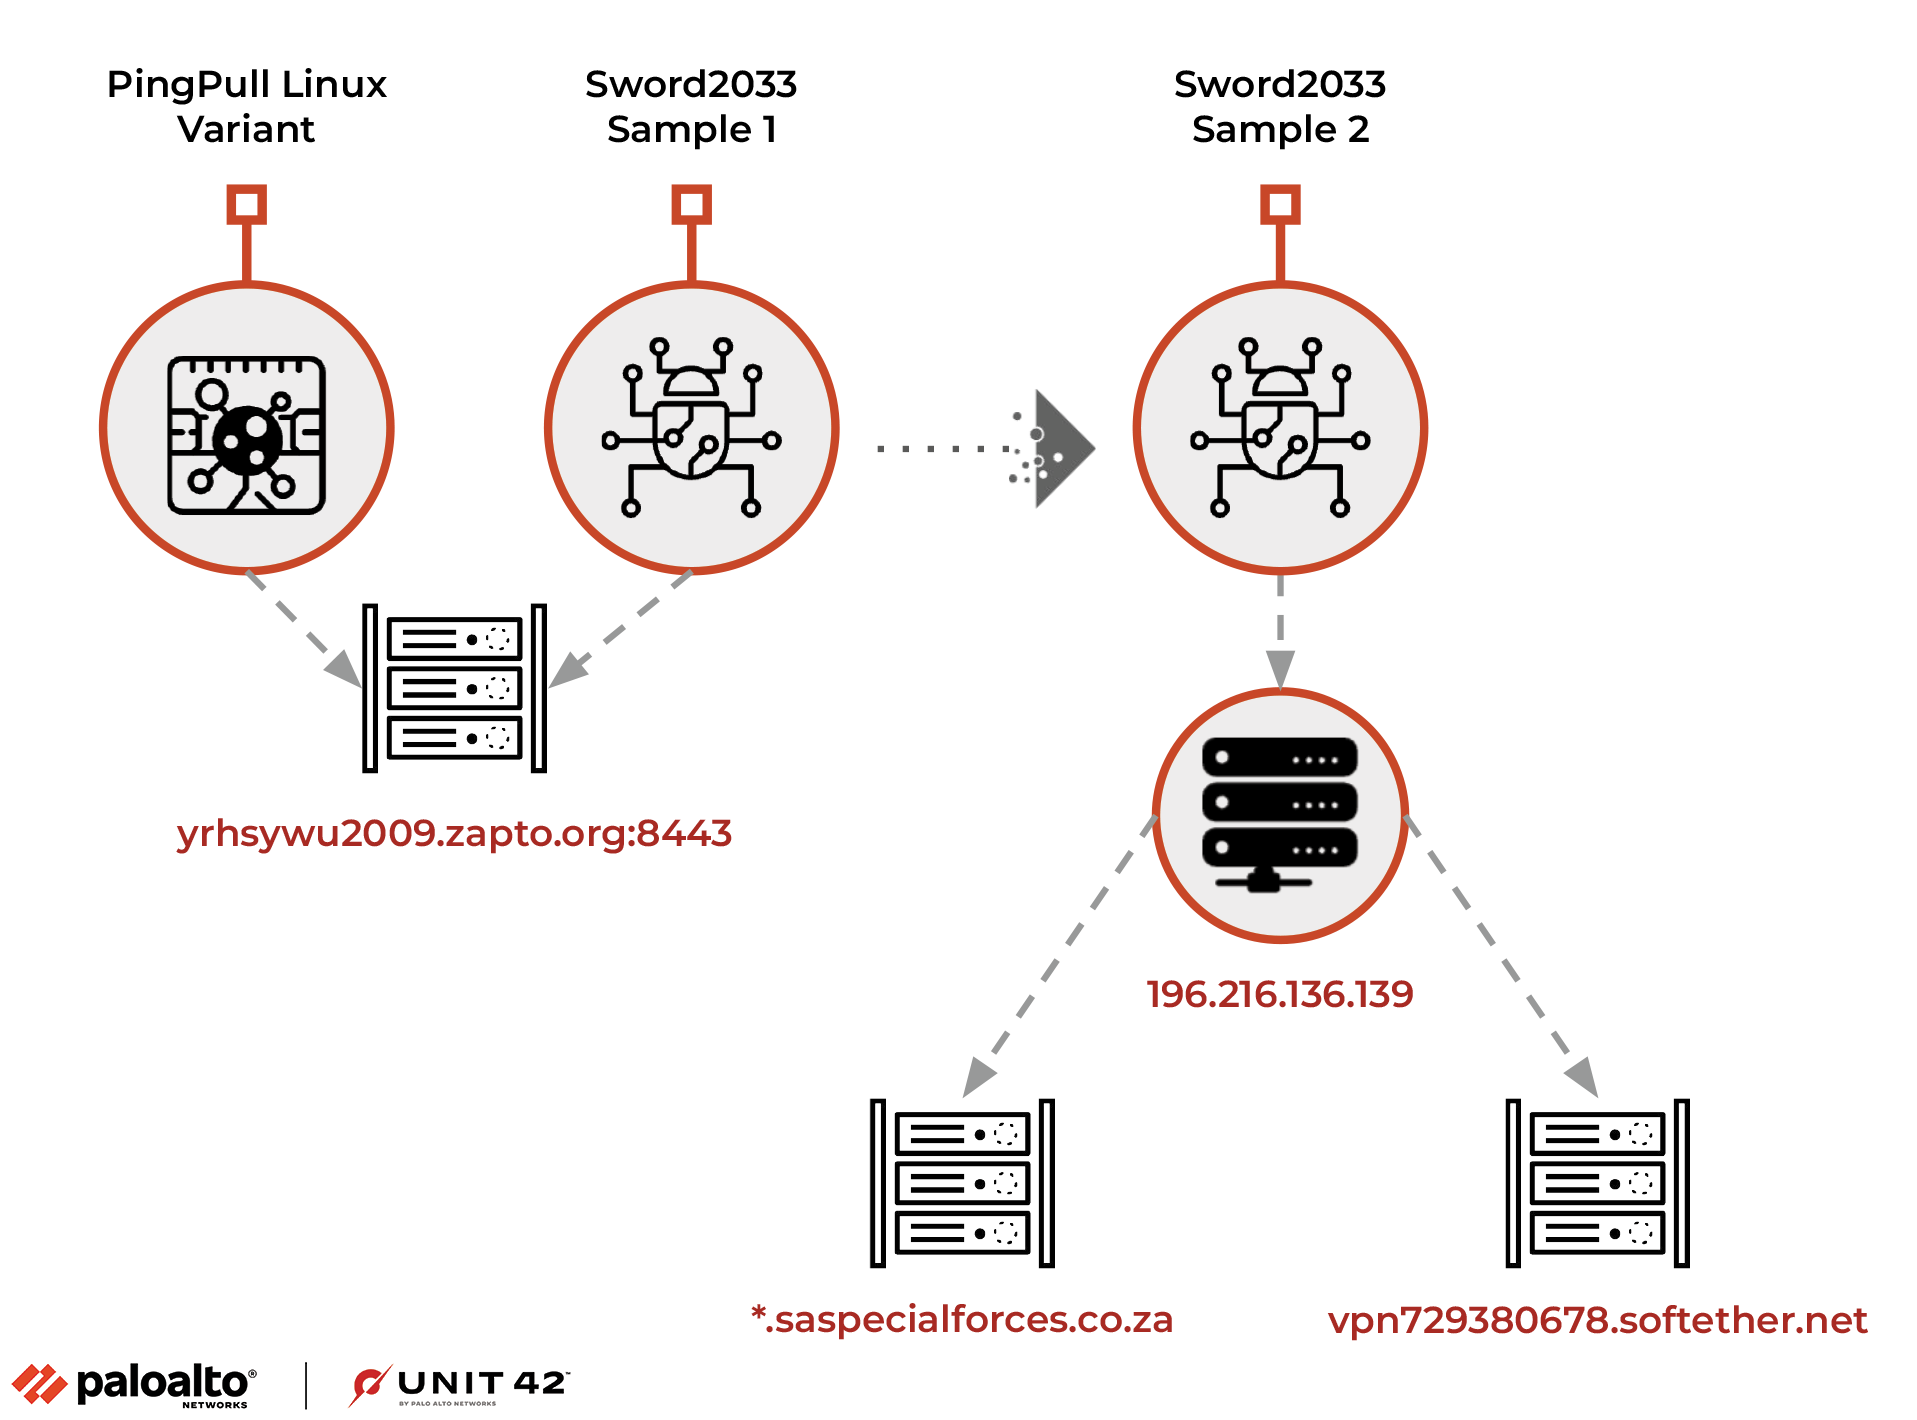 Image 3 is a diagram of the infrastructure of PingPull/Sword2033 including samples 1 and 2 of Sword2033. 